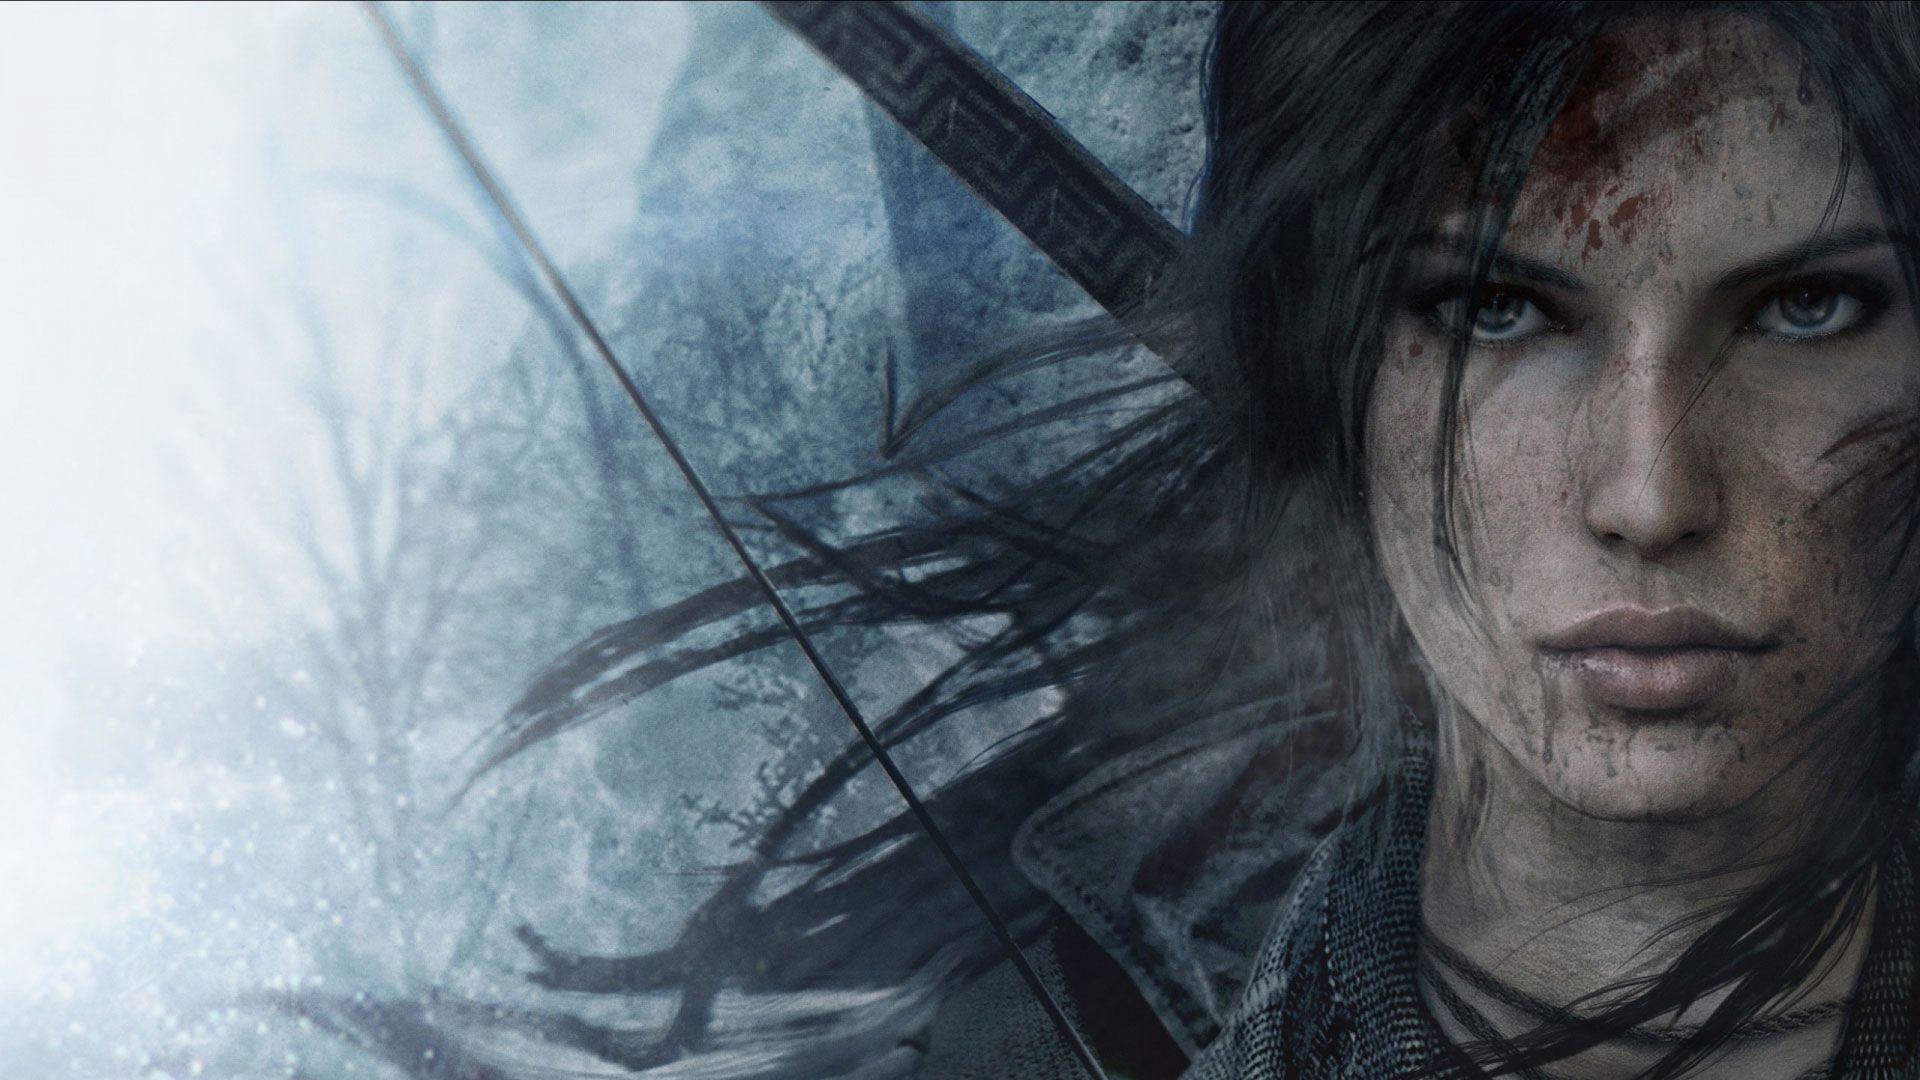 Rise of the Tomb Raider 4K, 1080p and 720p Ultra HD Wallpaper